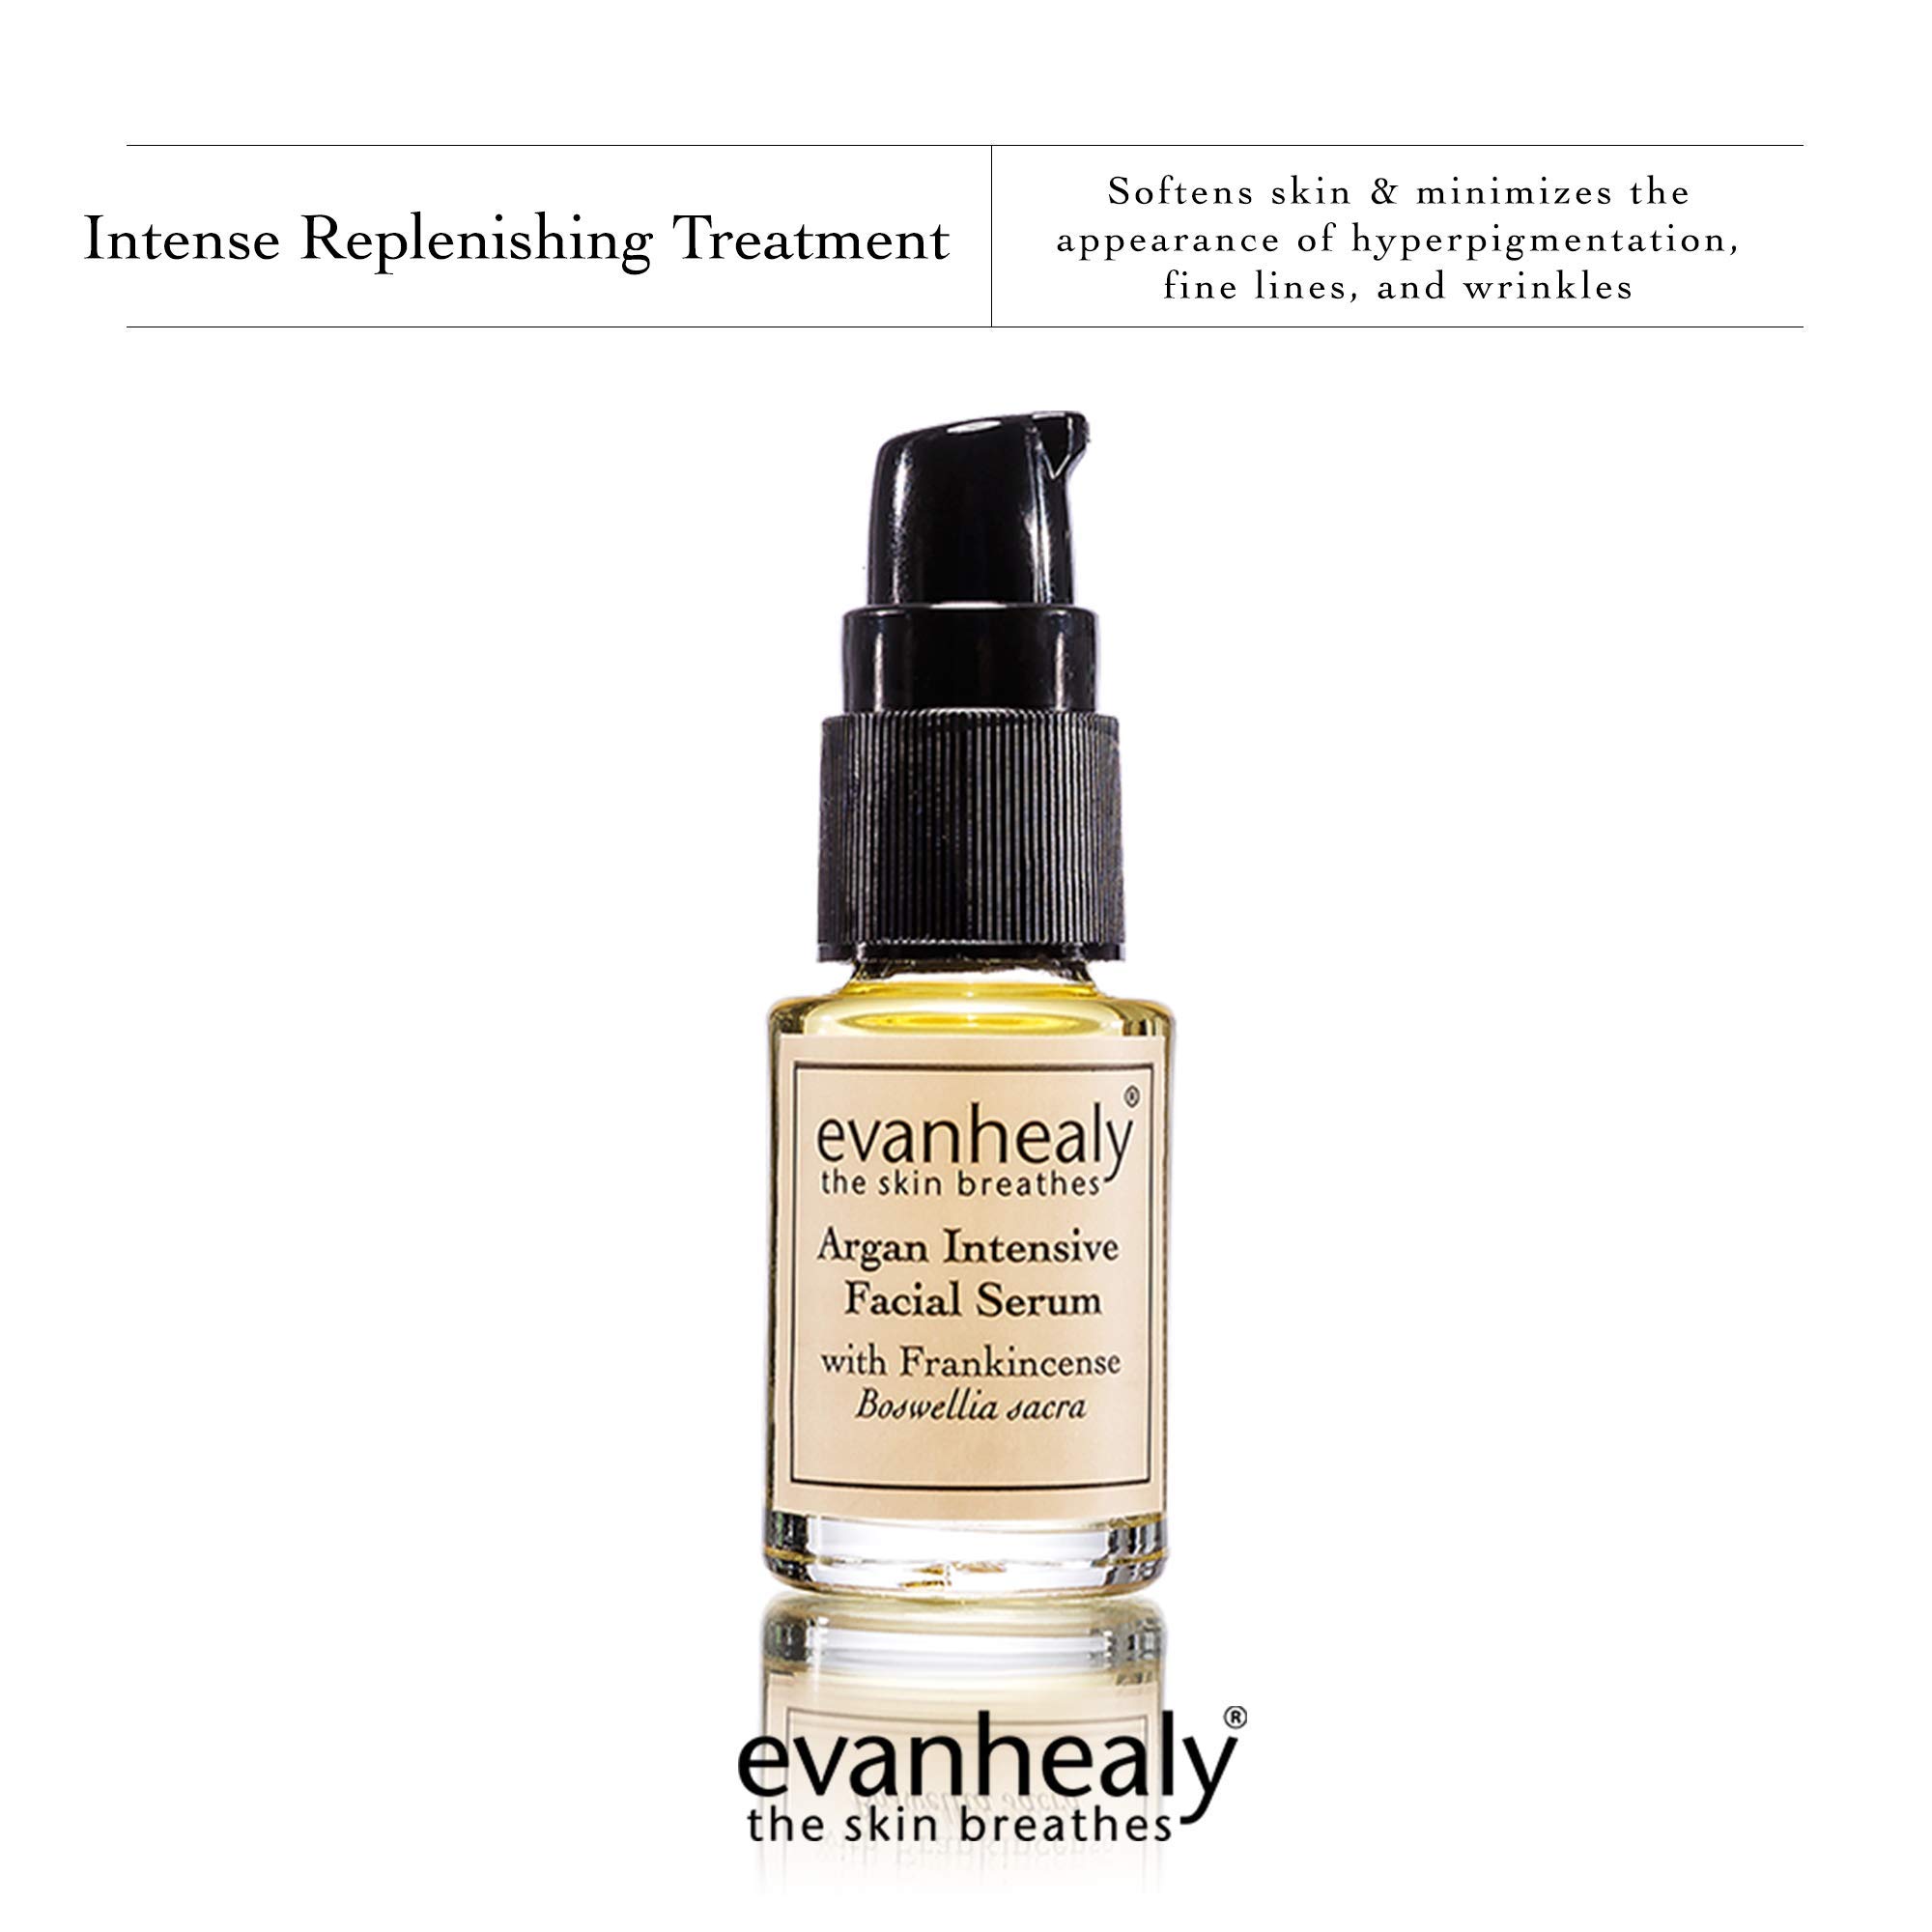 evanhealy Argan Intensive Facial Serum | Handcrafted Argan Oil with Organic Essential Oils | Nourishing & Rejuvenating Treatment for All Skin Types